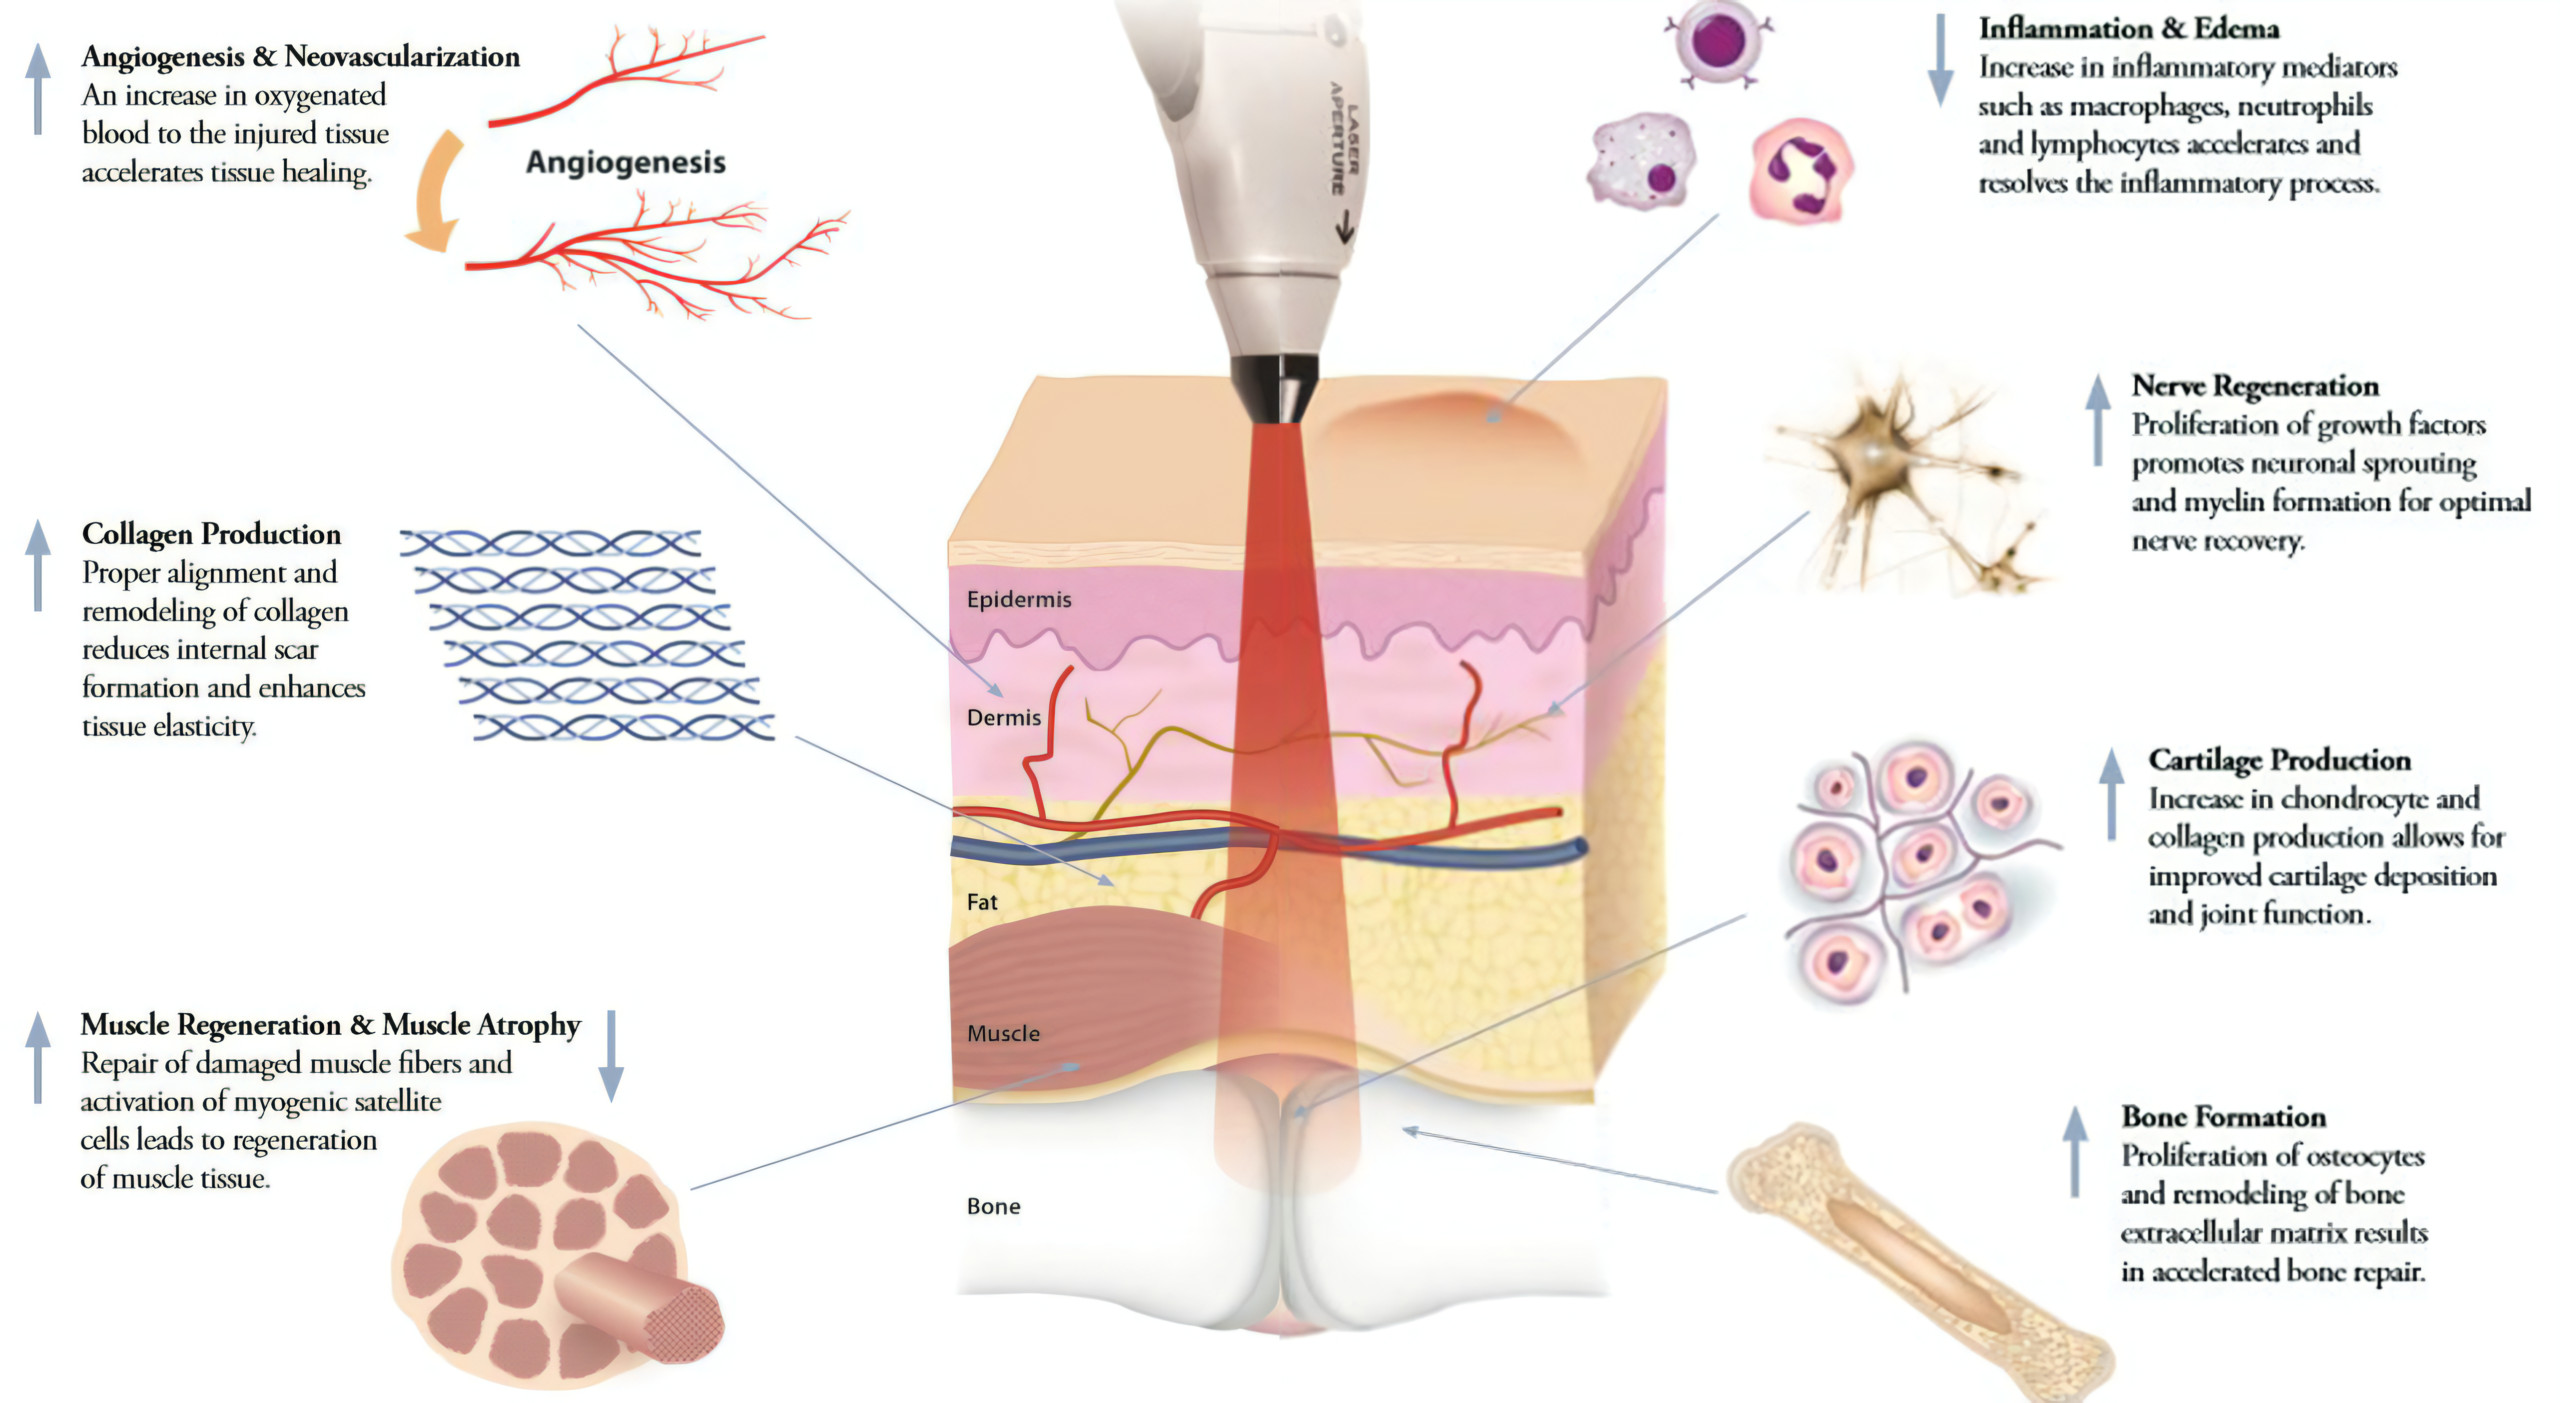 Cold Laser Therapy effects on body tissue